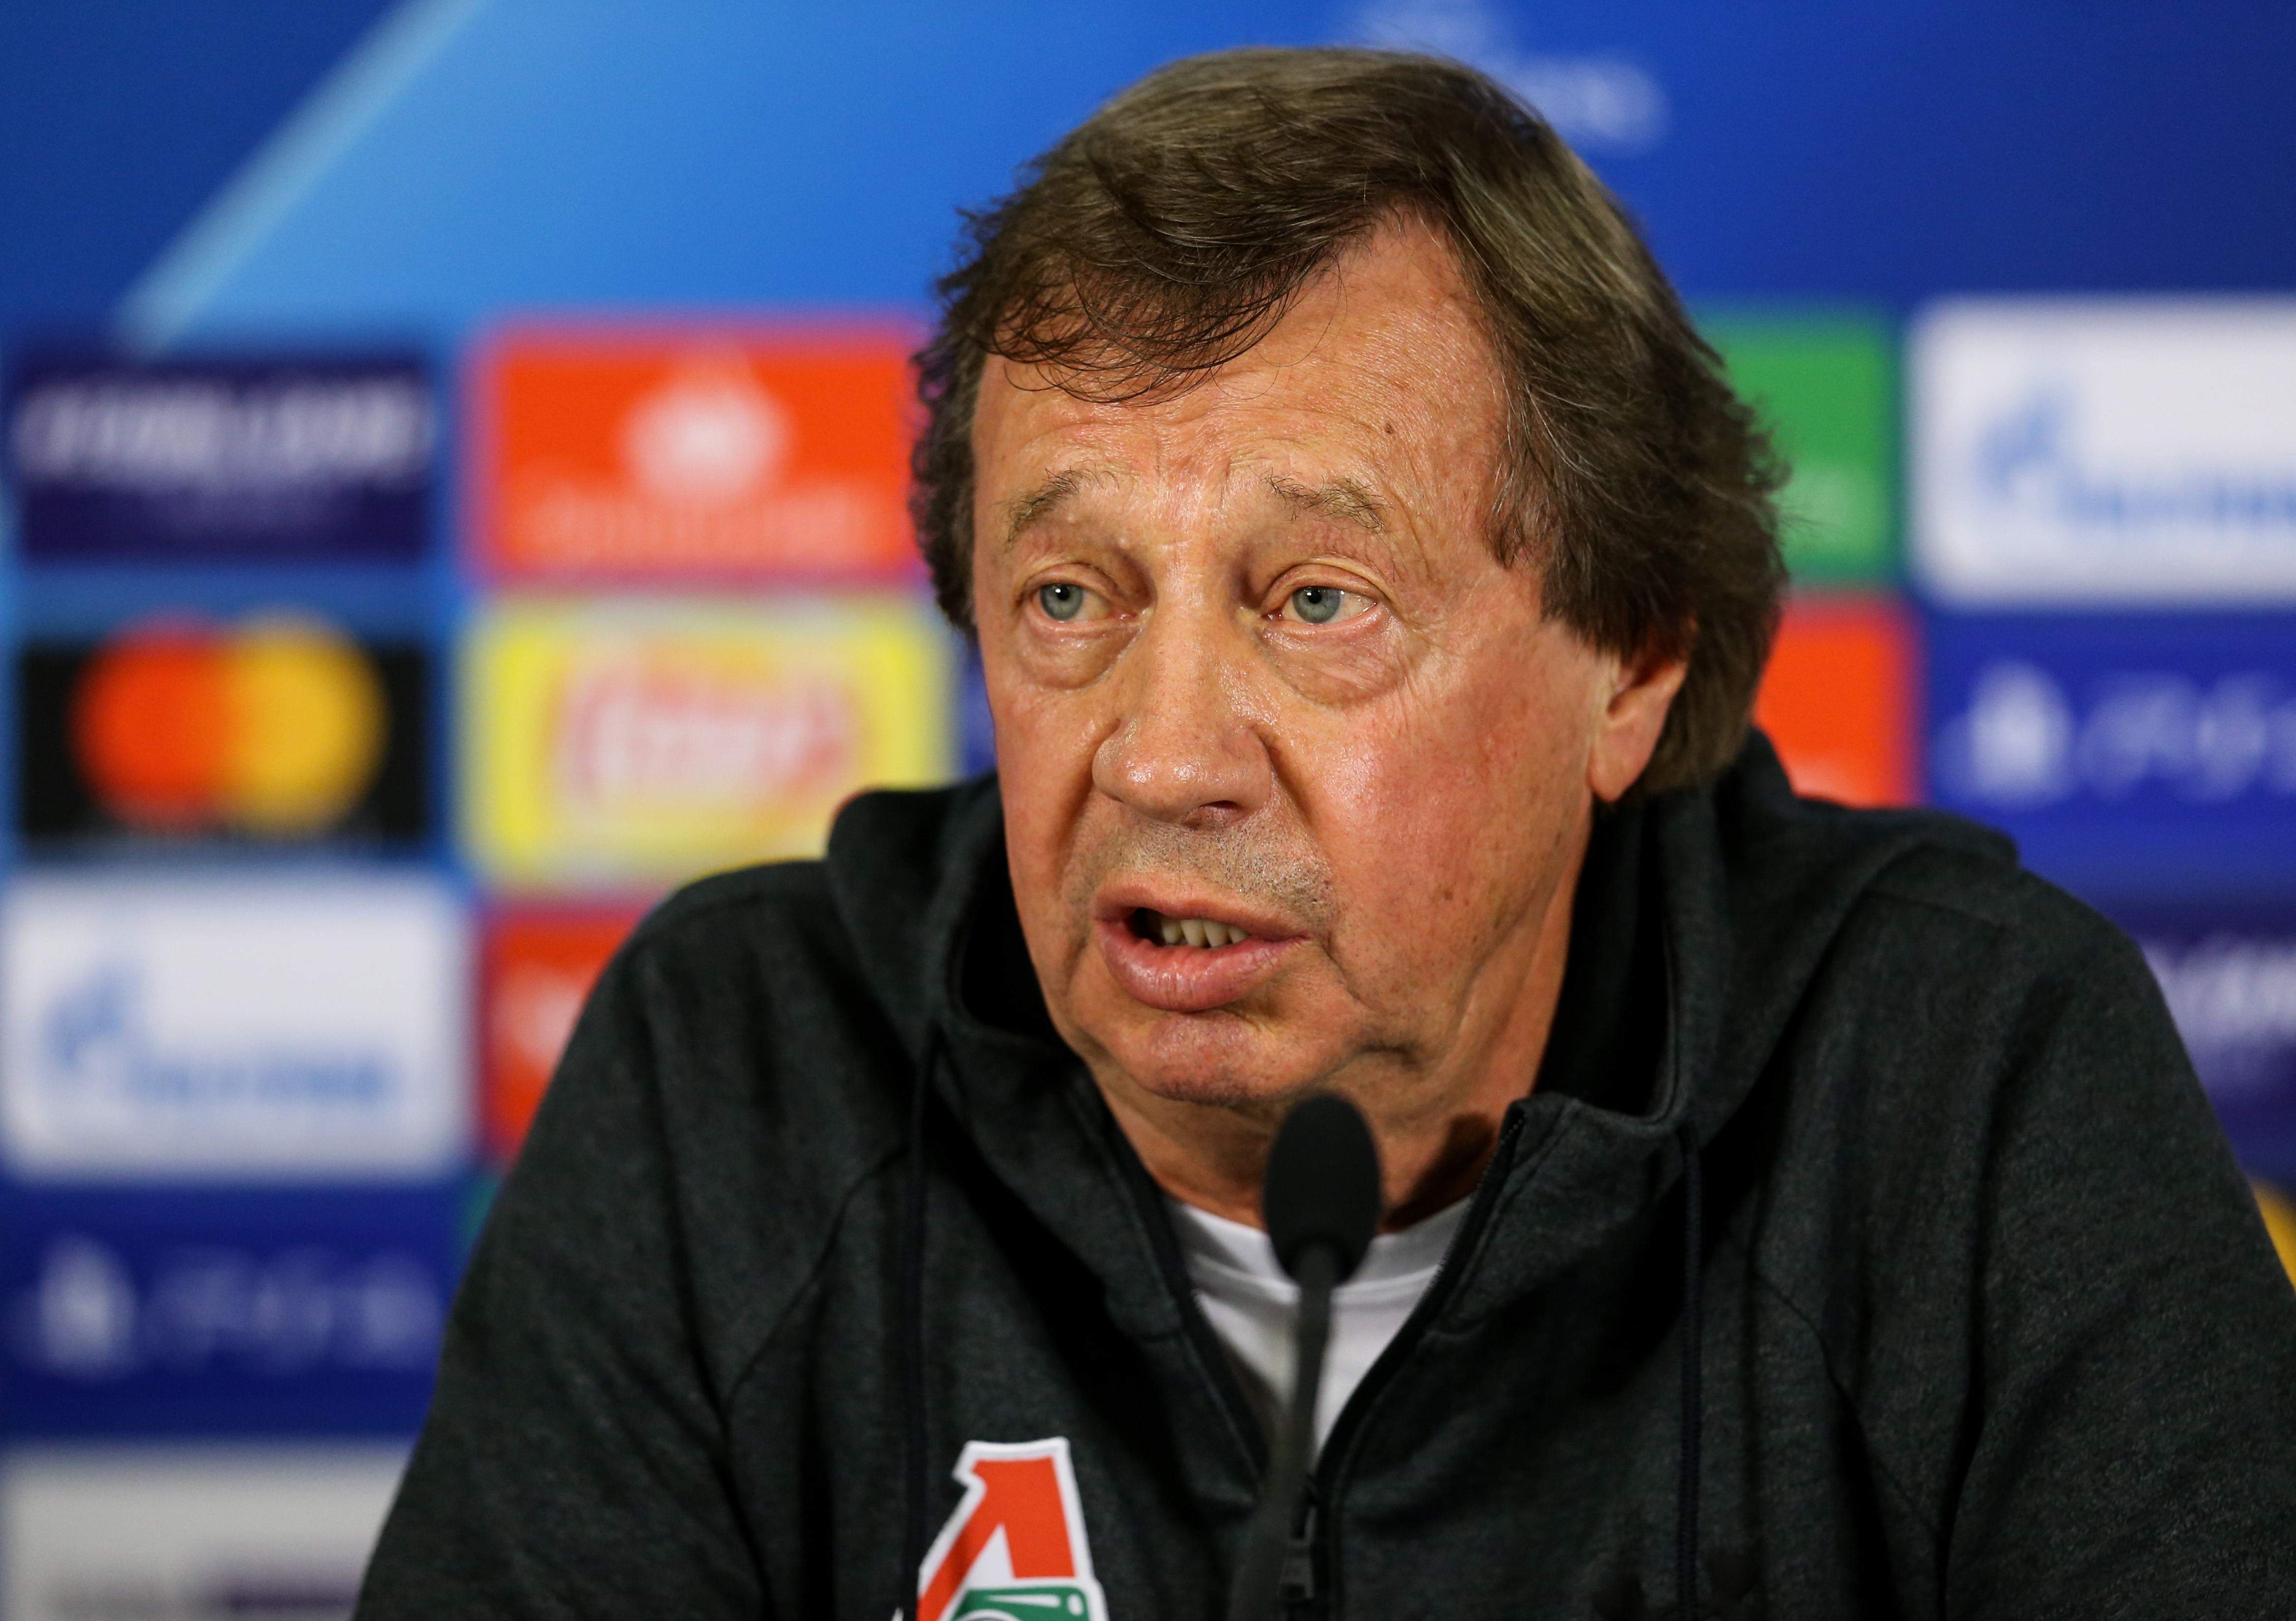 ISTANBUL, TURKEY - SEPTEMBER 17 : Head coach Yuri Semin of Lokomotiv Moscow speaks during a press conference held with team's player Manuel Fernandes (not seen) ahead of UEFA Champions League Group D match against Galatasaray at Turk Telekom Stadium in Istanbul, Turkey on September 17, 2018. Elif Ozturk / Anadolu Agency FOT. ABACA/NEWSPIX.PL POLAND ONLY! --- Newspix.pl *** Local Caption *** www.newspix.pl mail us: info@newspix.pl call us: 0048 022 23 22 222 --- Polish Picture Agency by Ringier Axel Springer Poland